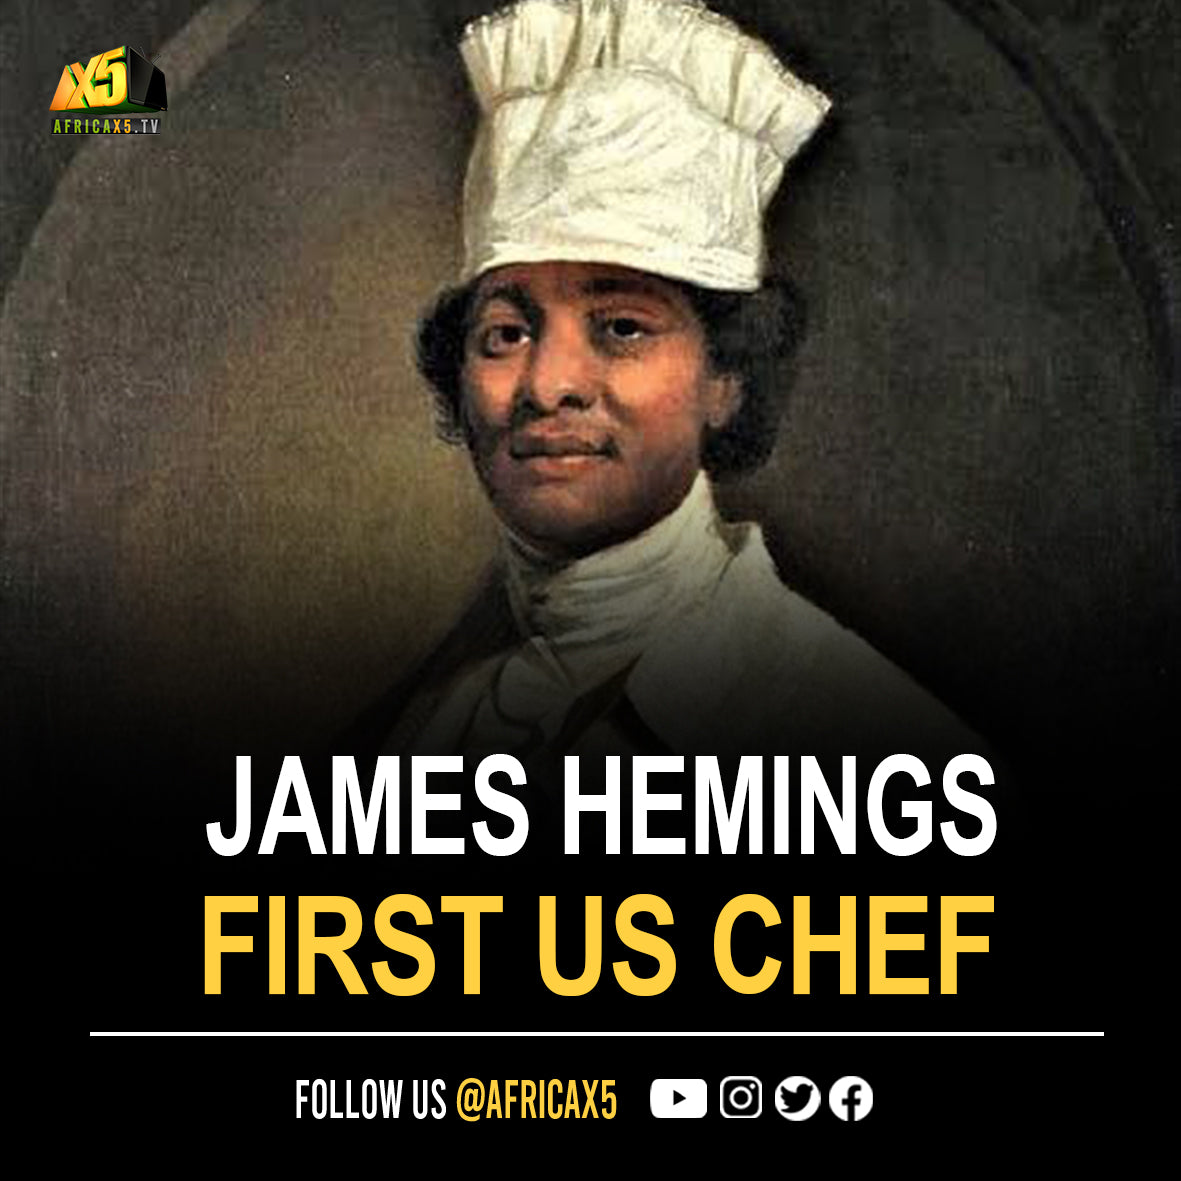 James Hemings, brother to Sally Hemings was the first American to train as a chef in France. He was enslaved by Thomas Jefferson at 8.